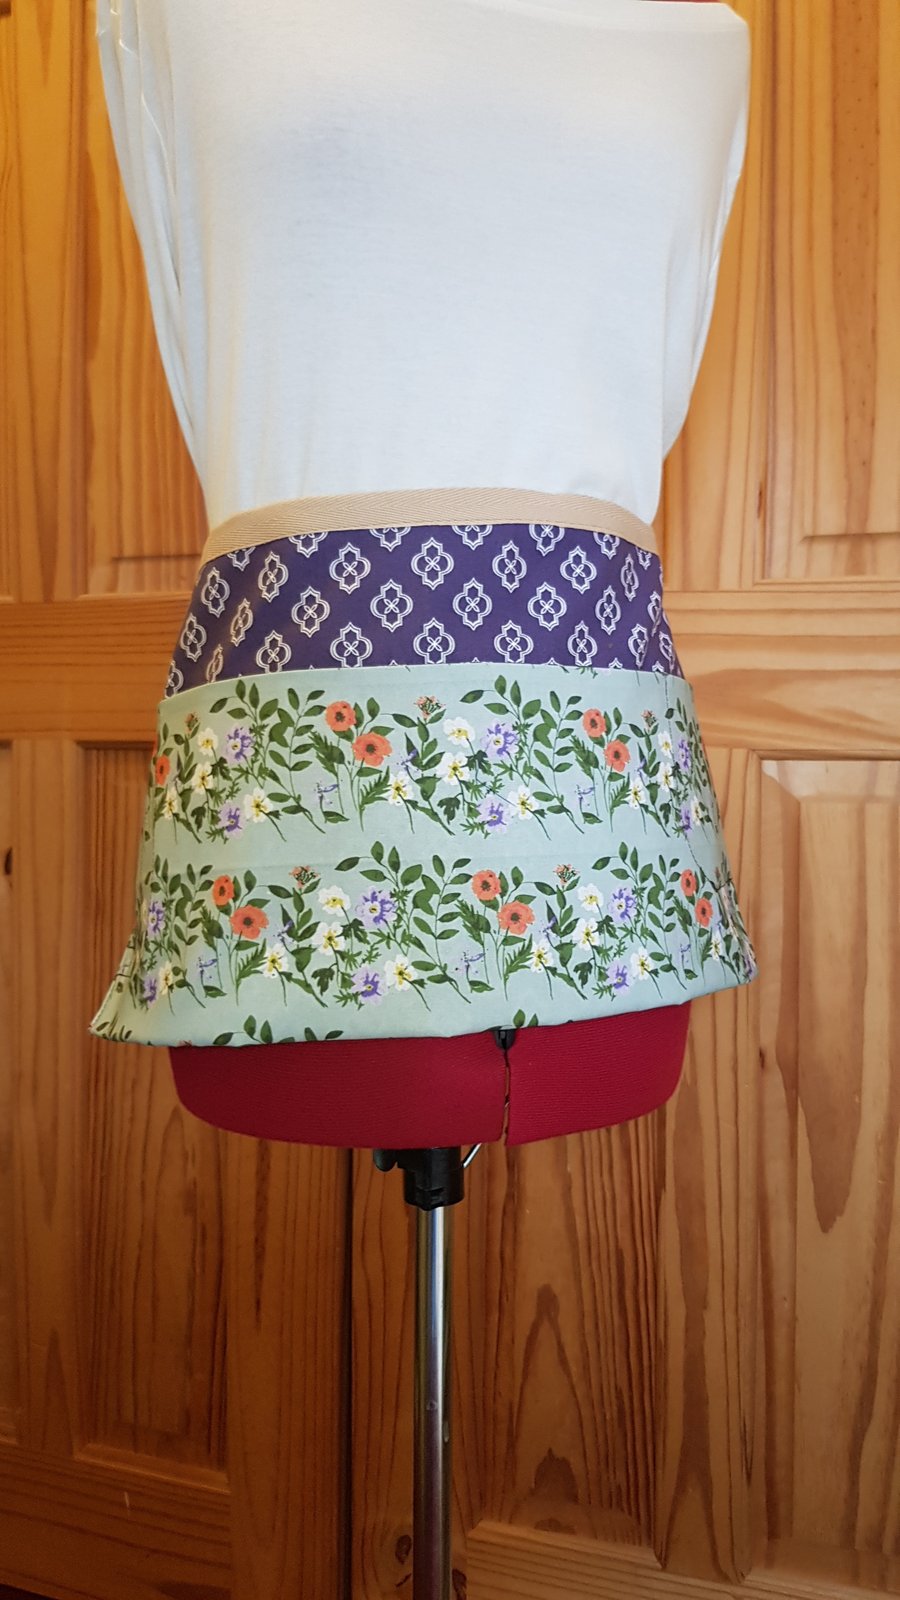 Garden apron; poppies with purple 